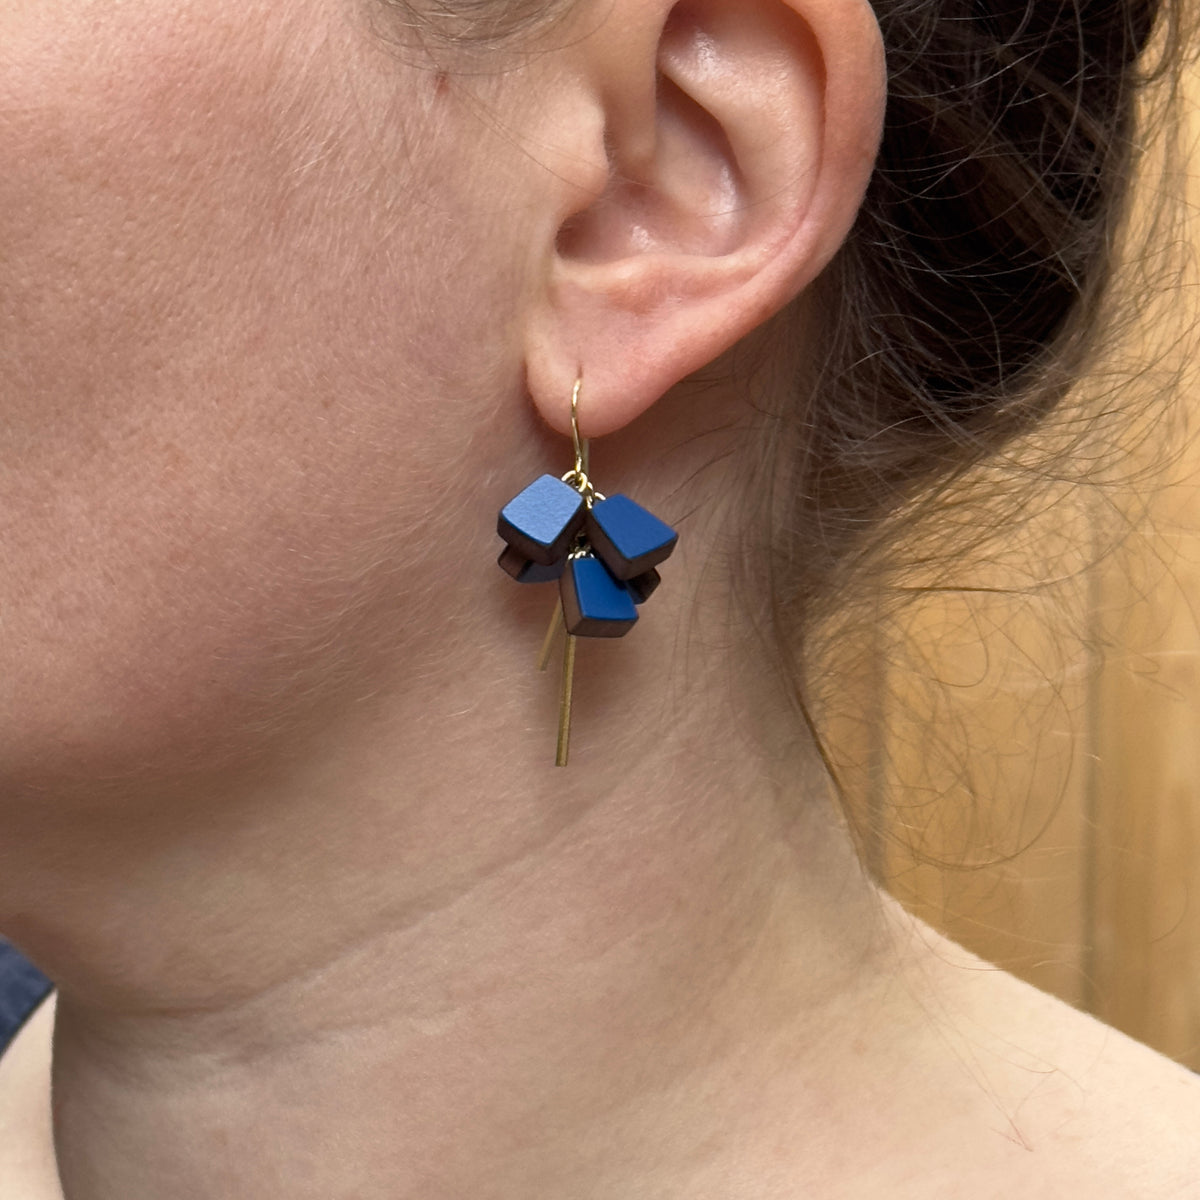 Cluster earrings - cobalt blue and gold